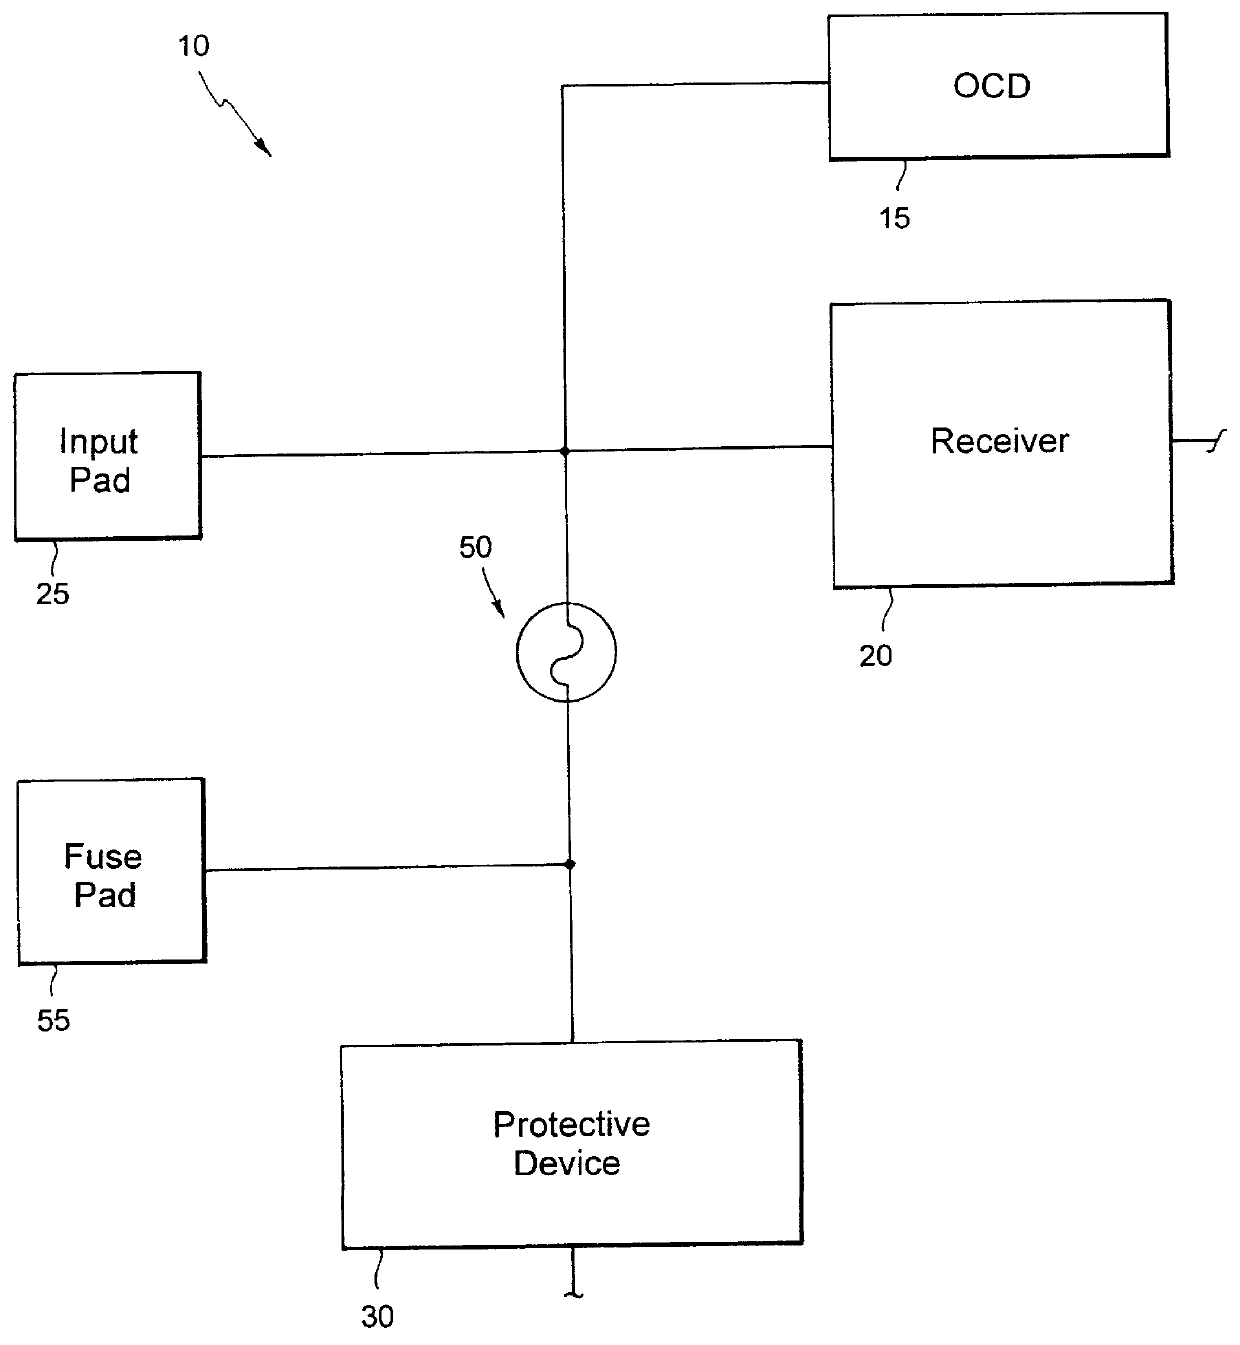 Impedance control using fuses